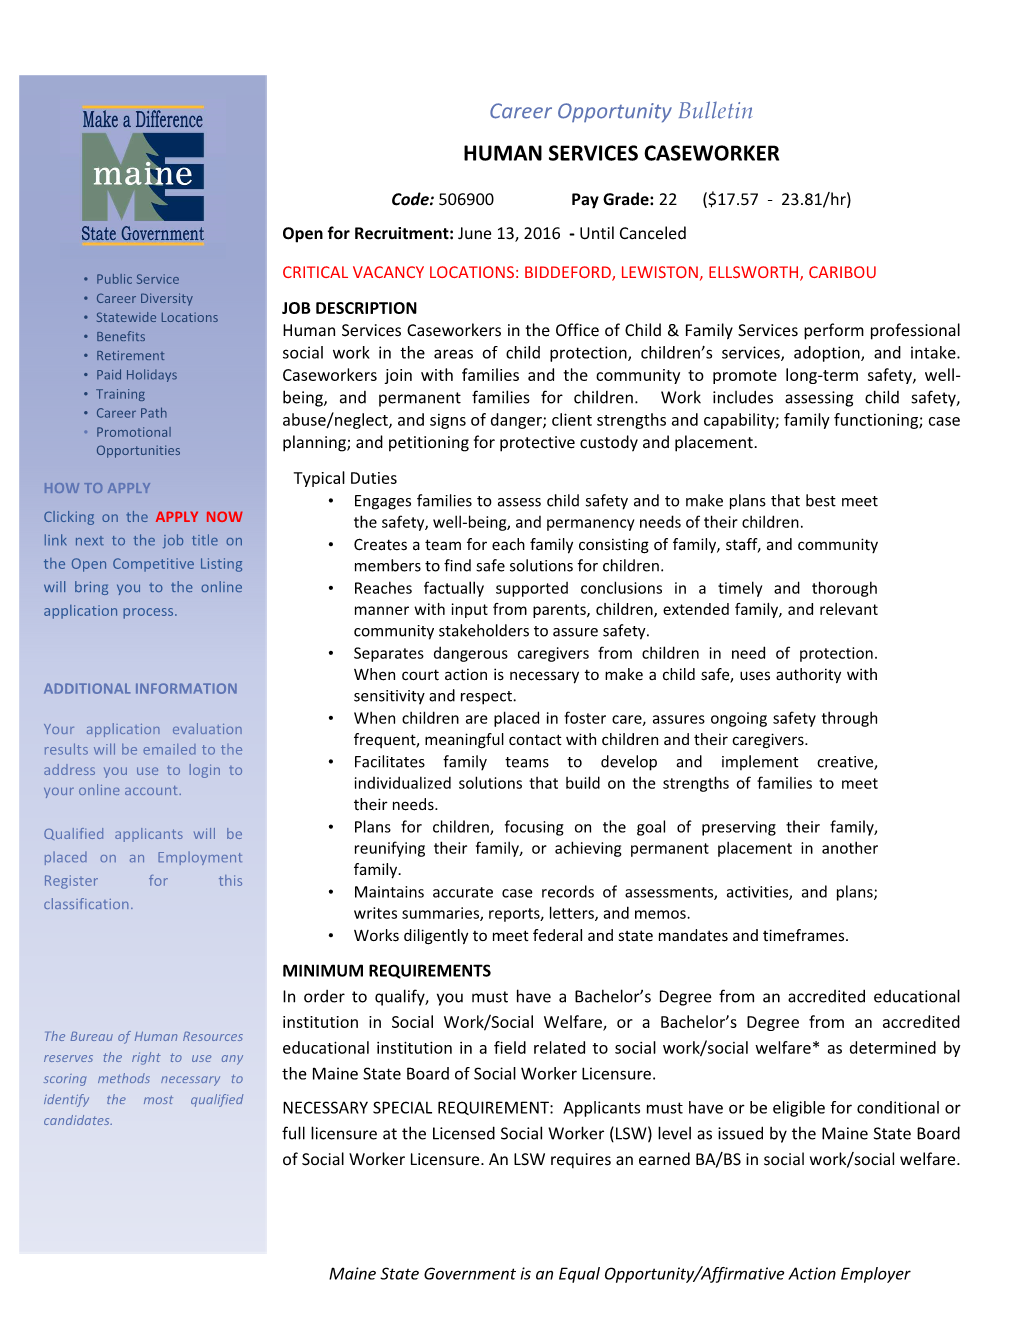 Career Opportunity Bulletin HUMAN SERVICES CASEWORKER